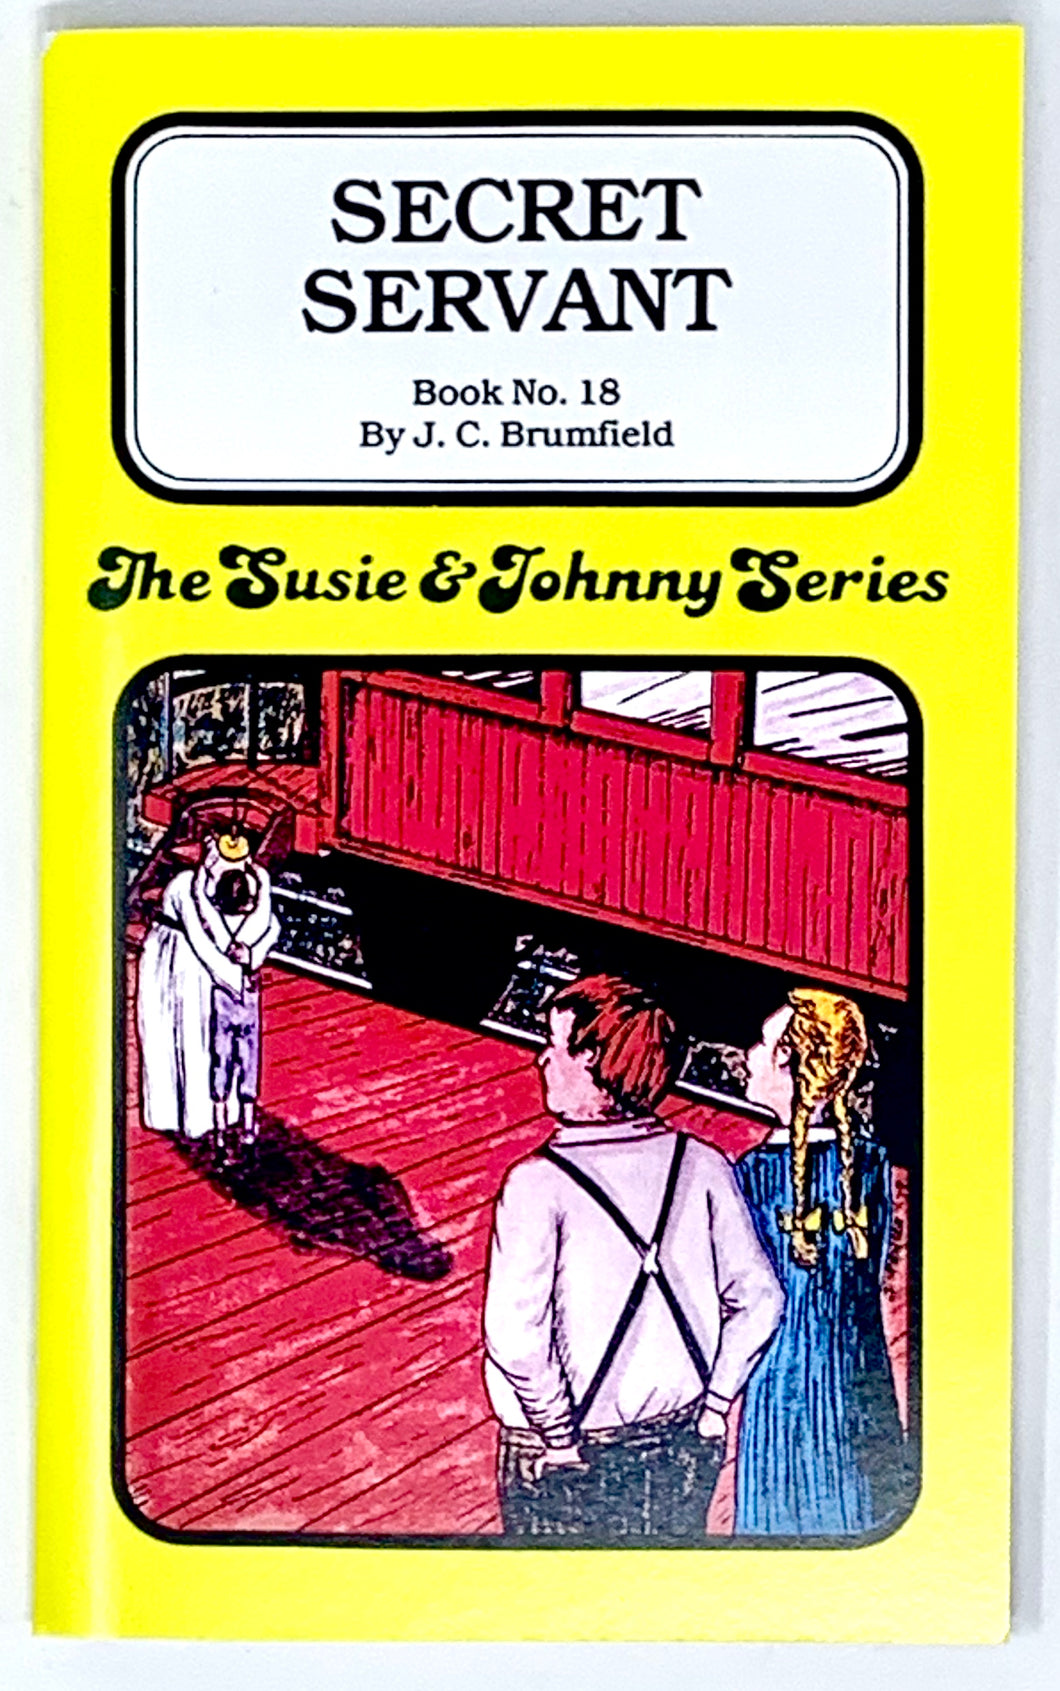 THE SUSIE & JOHNNY SERIES BOOK #18 